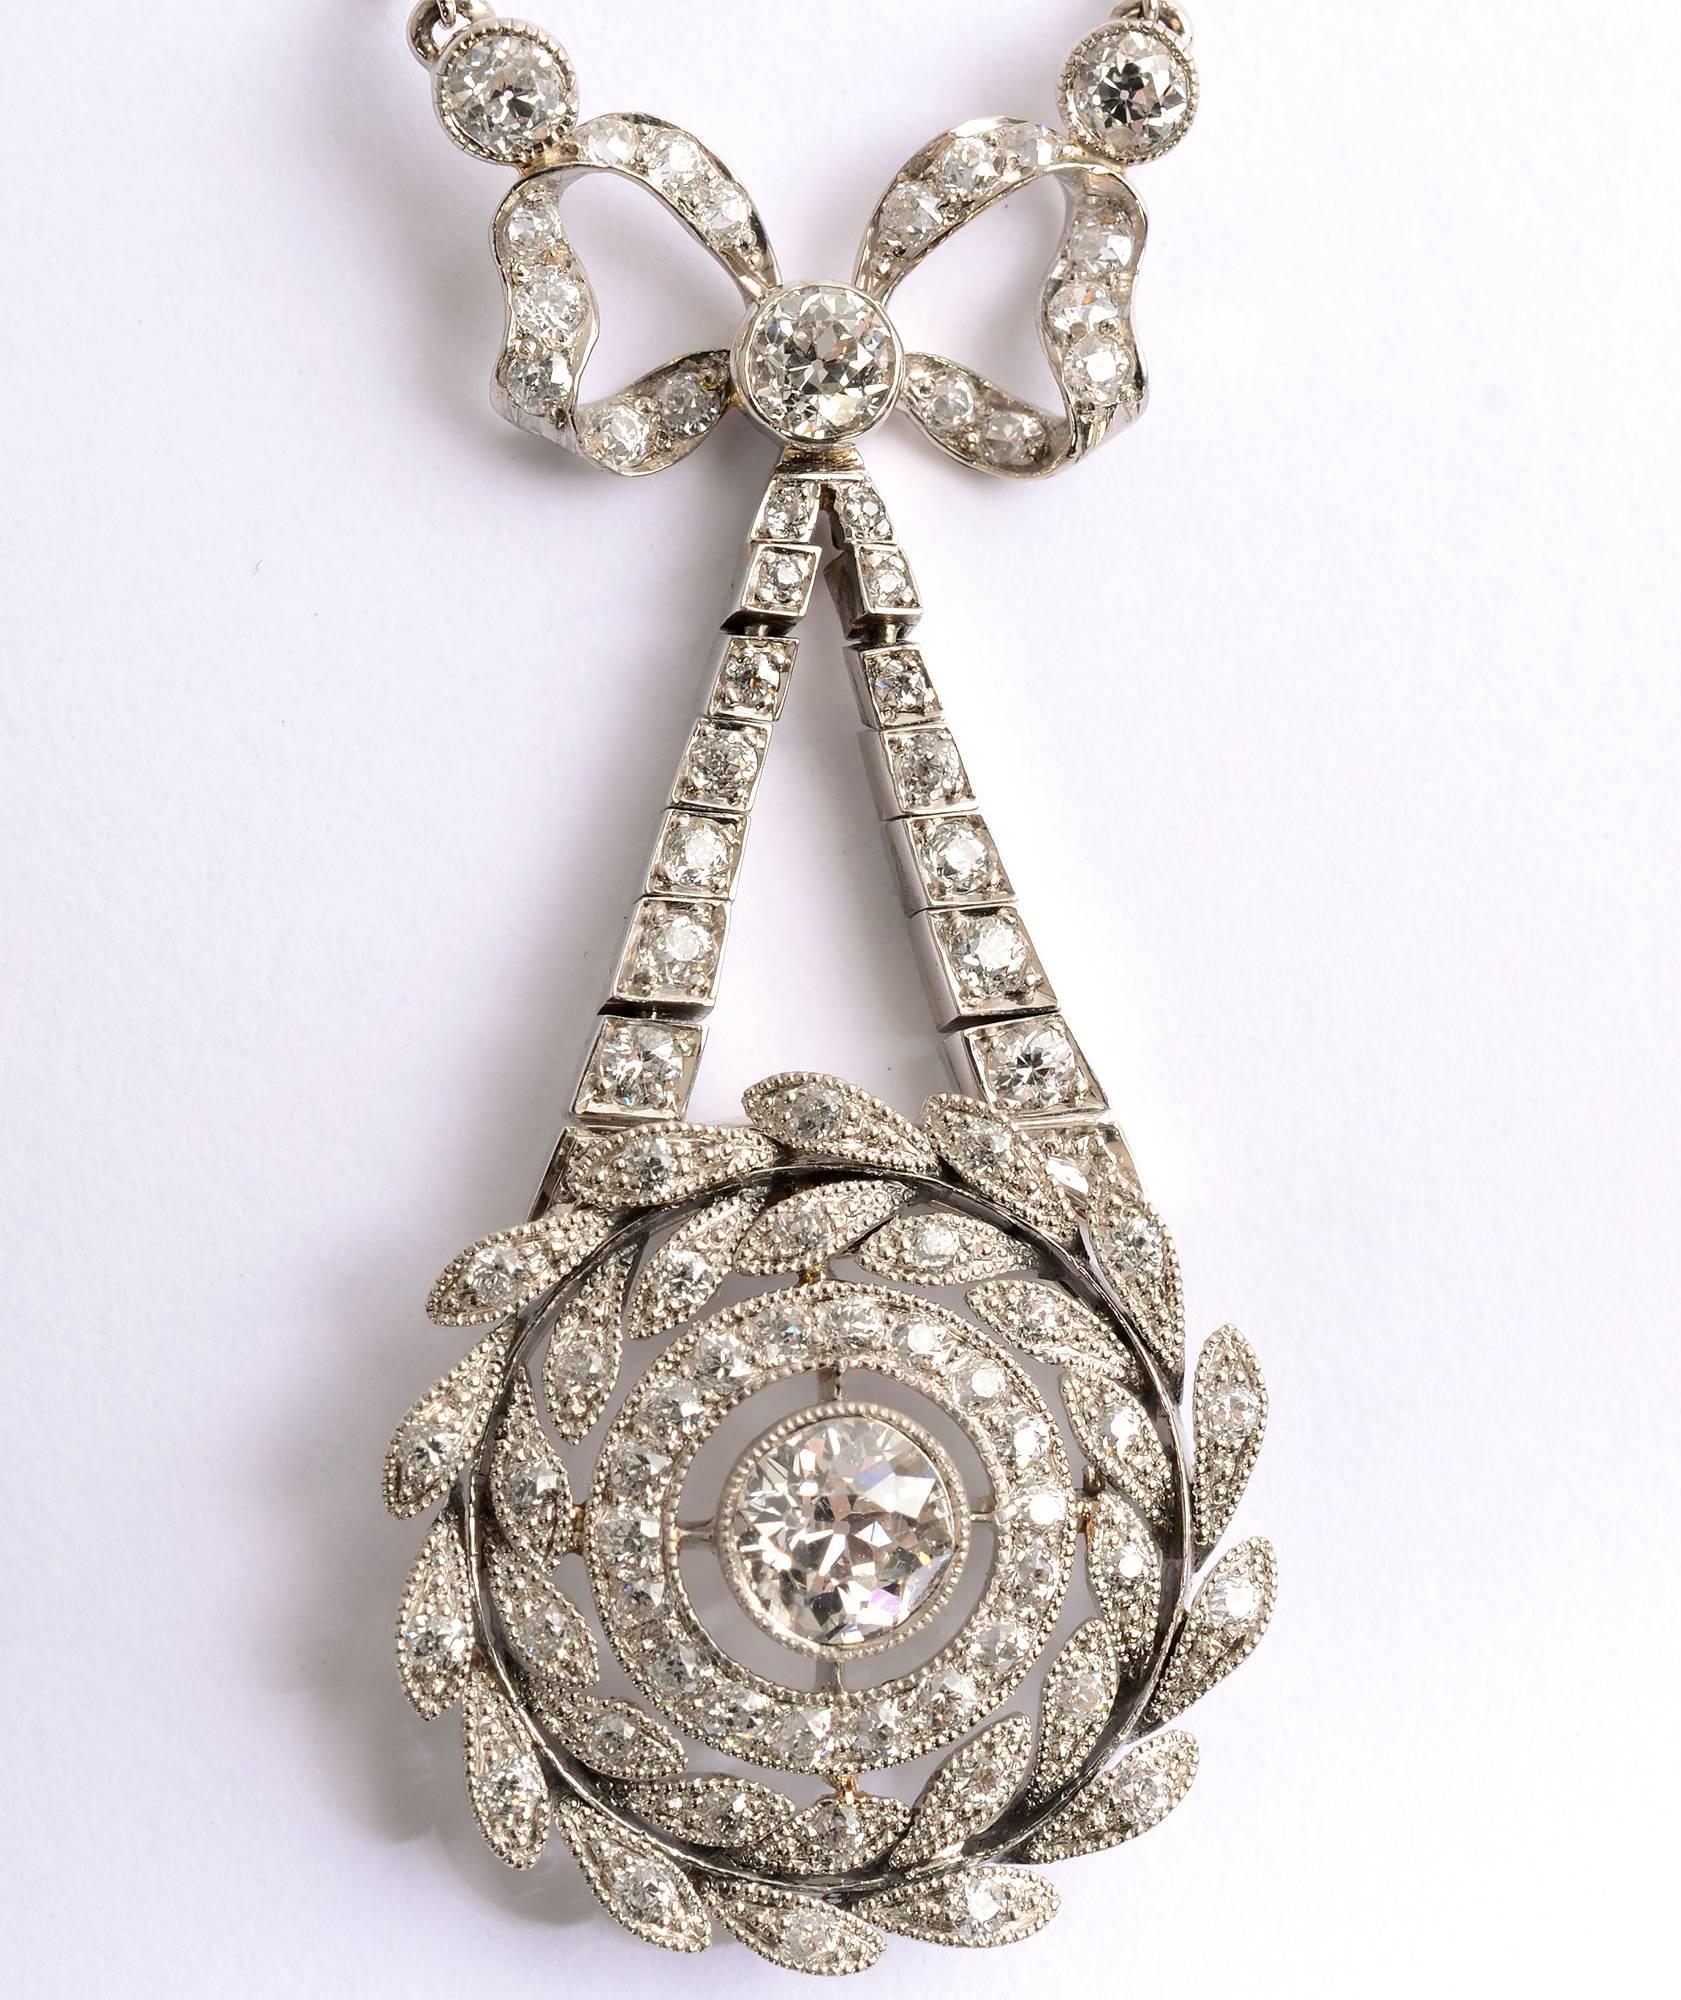 Elegant Edwardian diamond pendant necklace by J.E. Caldwell, one of America's earliest jewelers. The firm was established in 1839 and flourished with their Edwardian and Art Deco jewelry. 
This elegant bow pendant terminating in wreaths of diamond